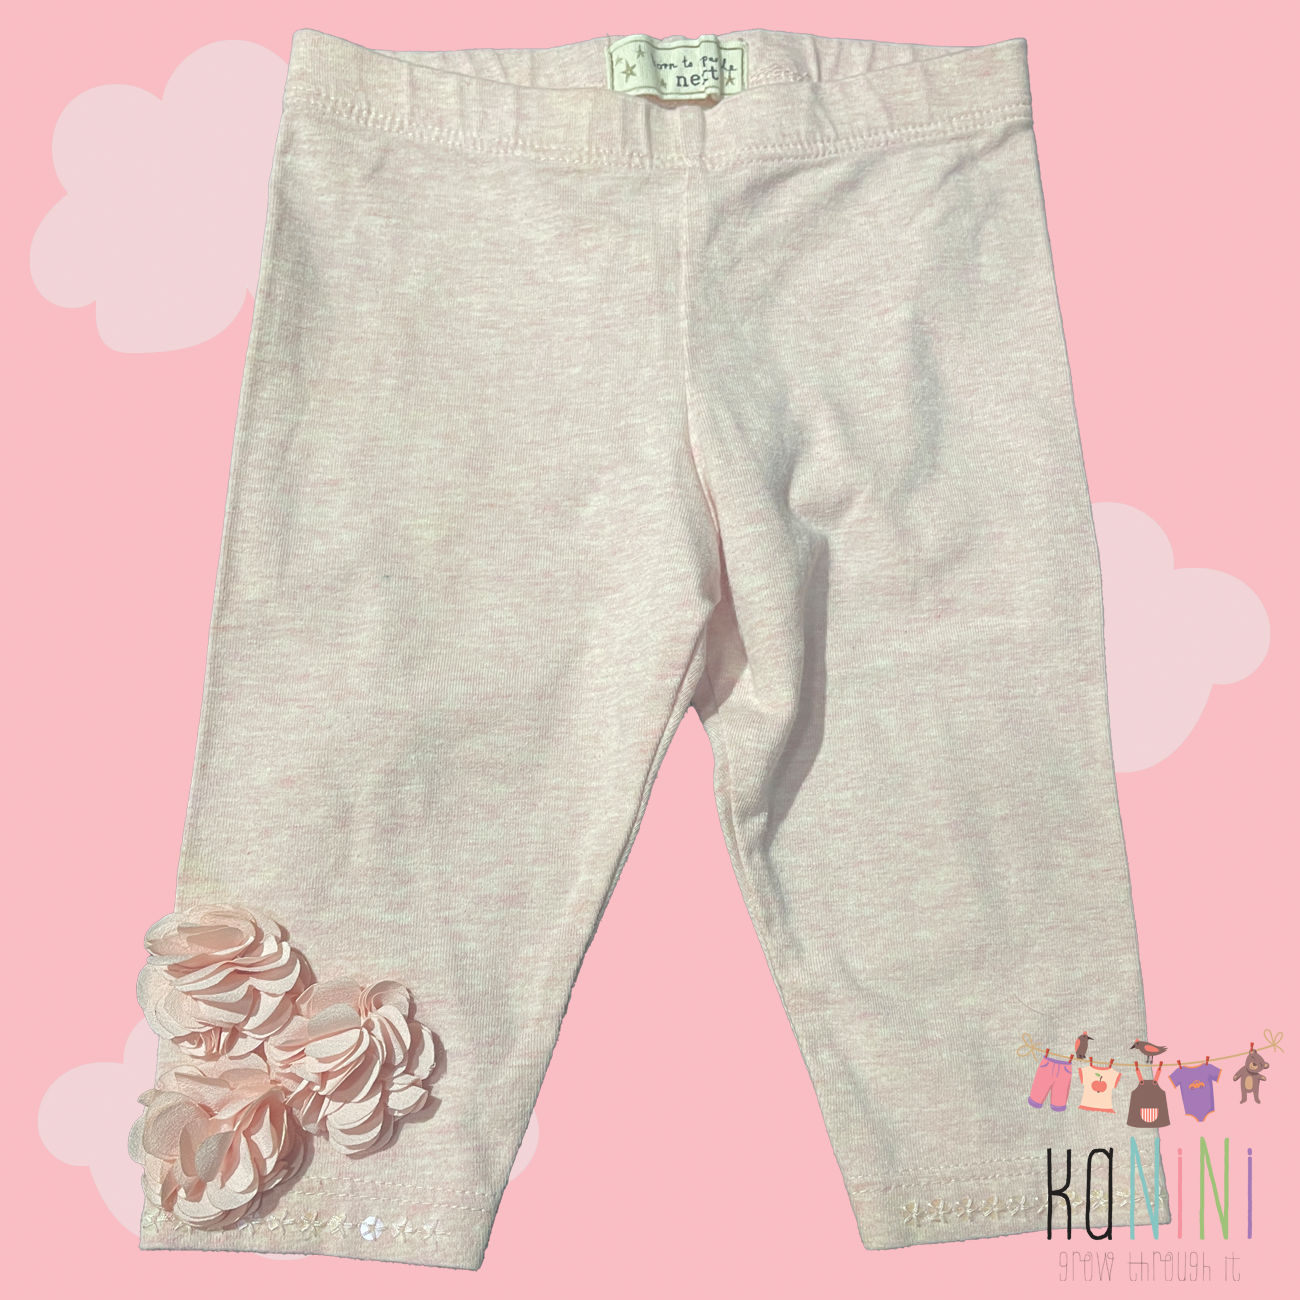 Featured image for “UK Next 3 - 6 Months Girls Leggings With Flower Detail”